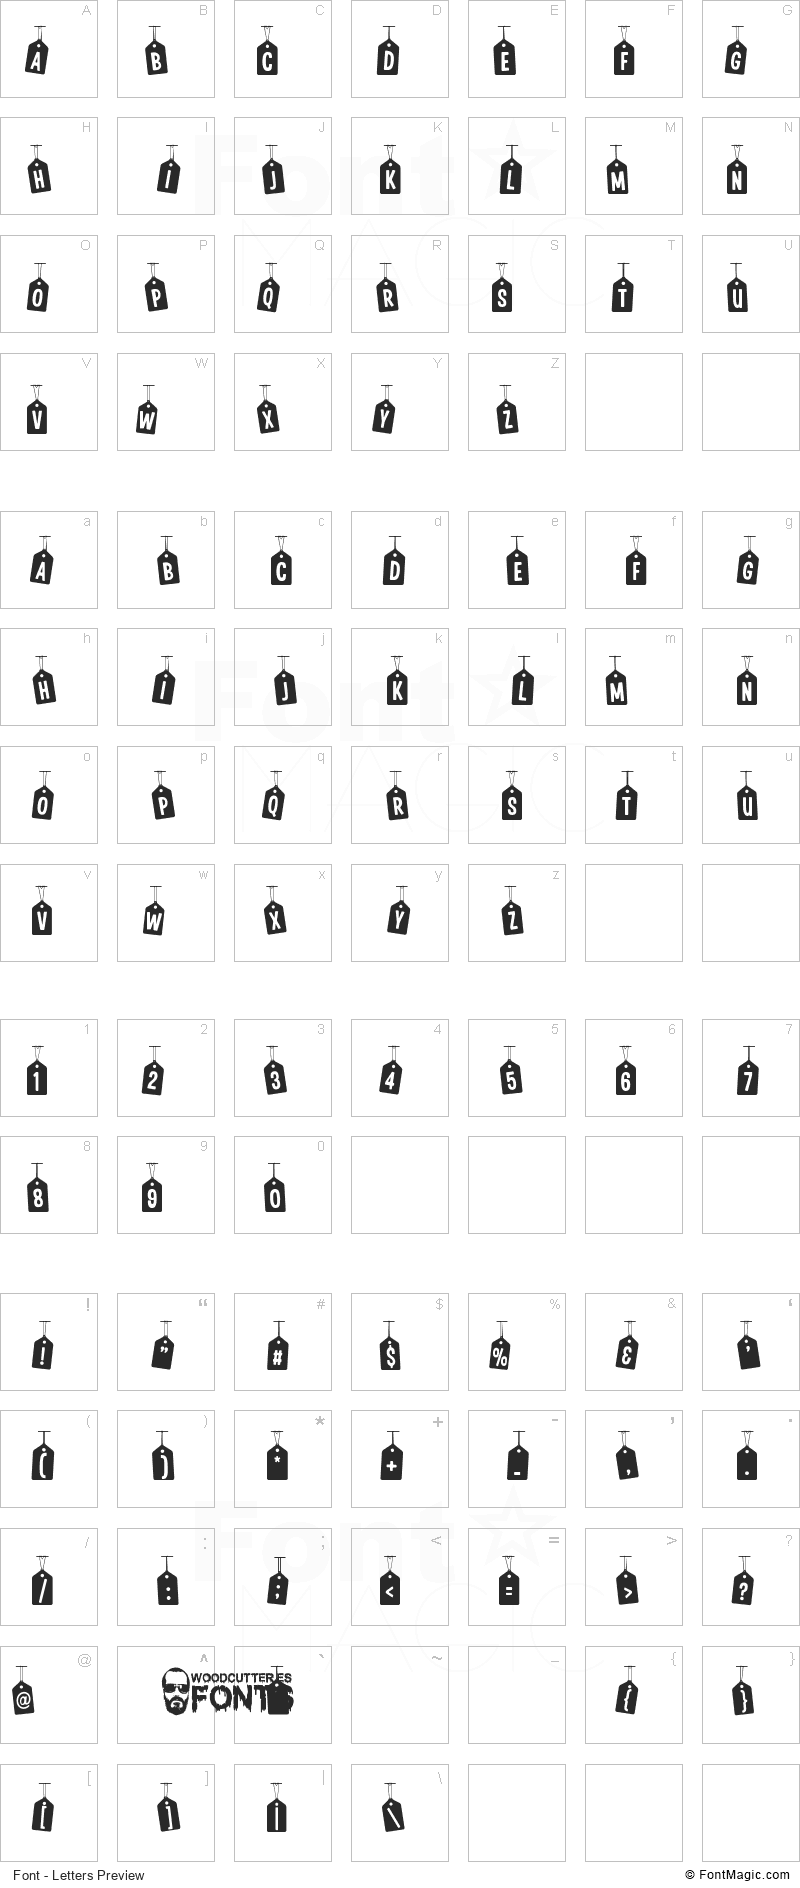 Woodcutter Tags on a Rope Font - All Latters Preview Chart